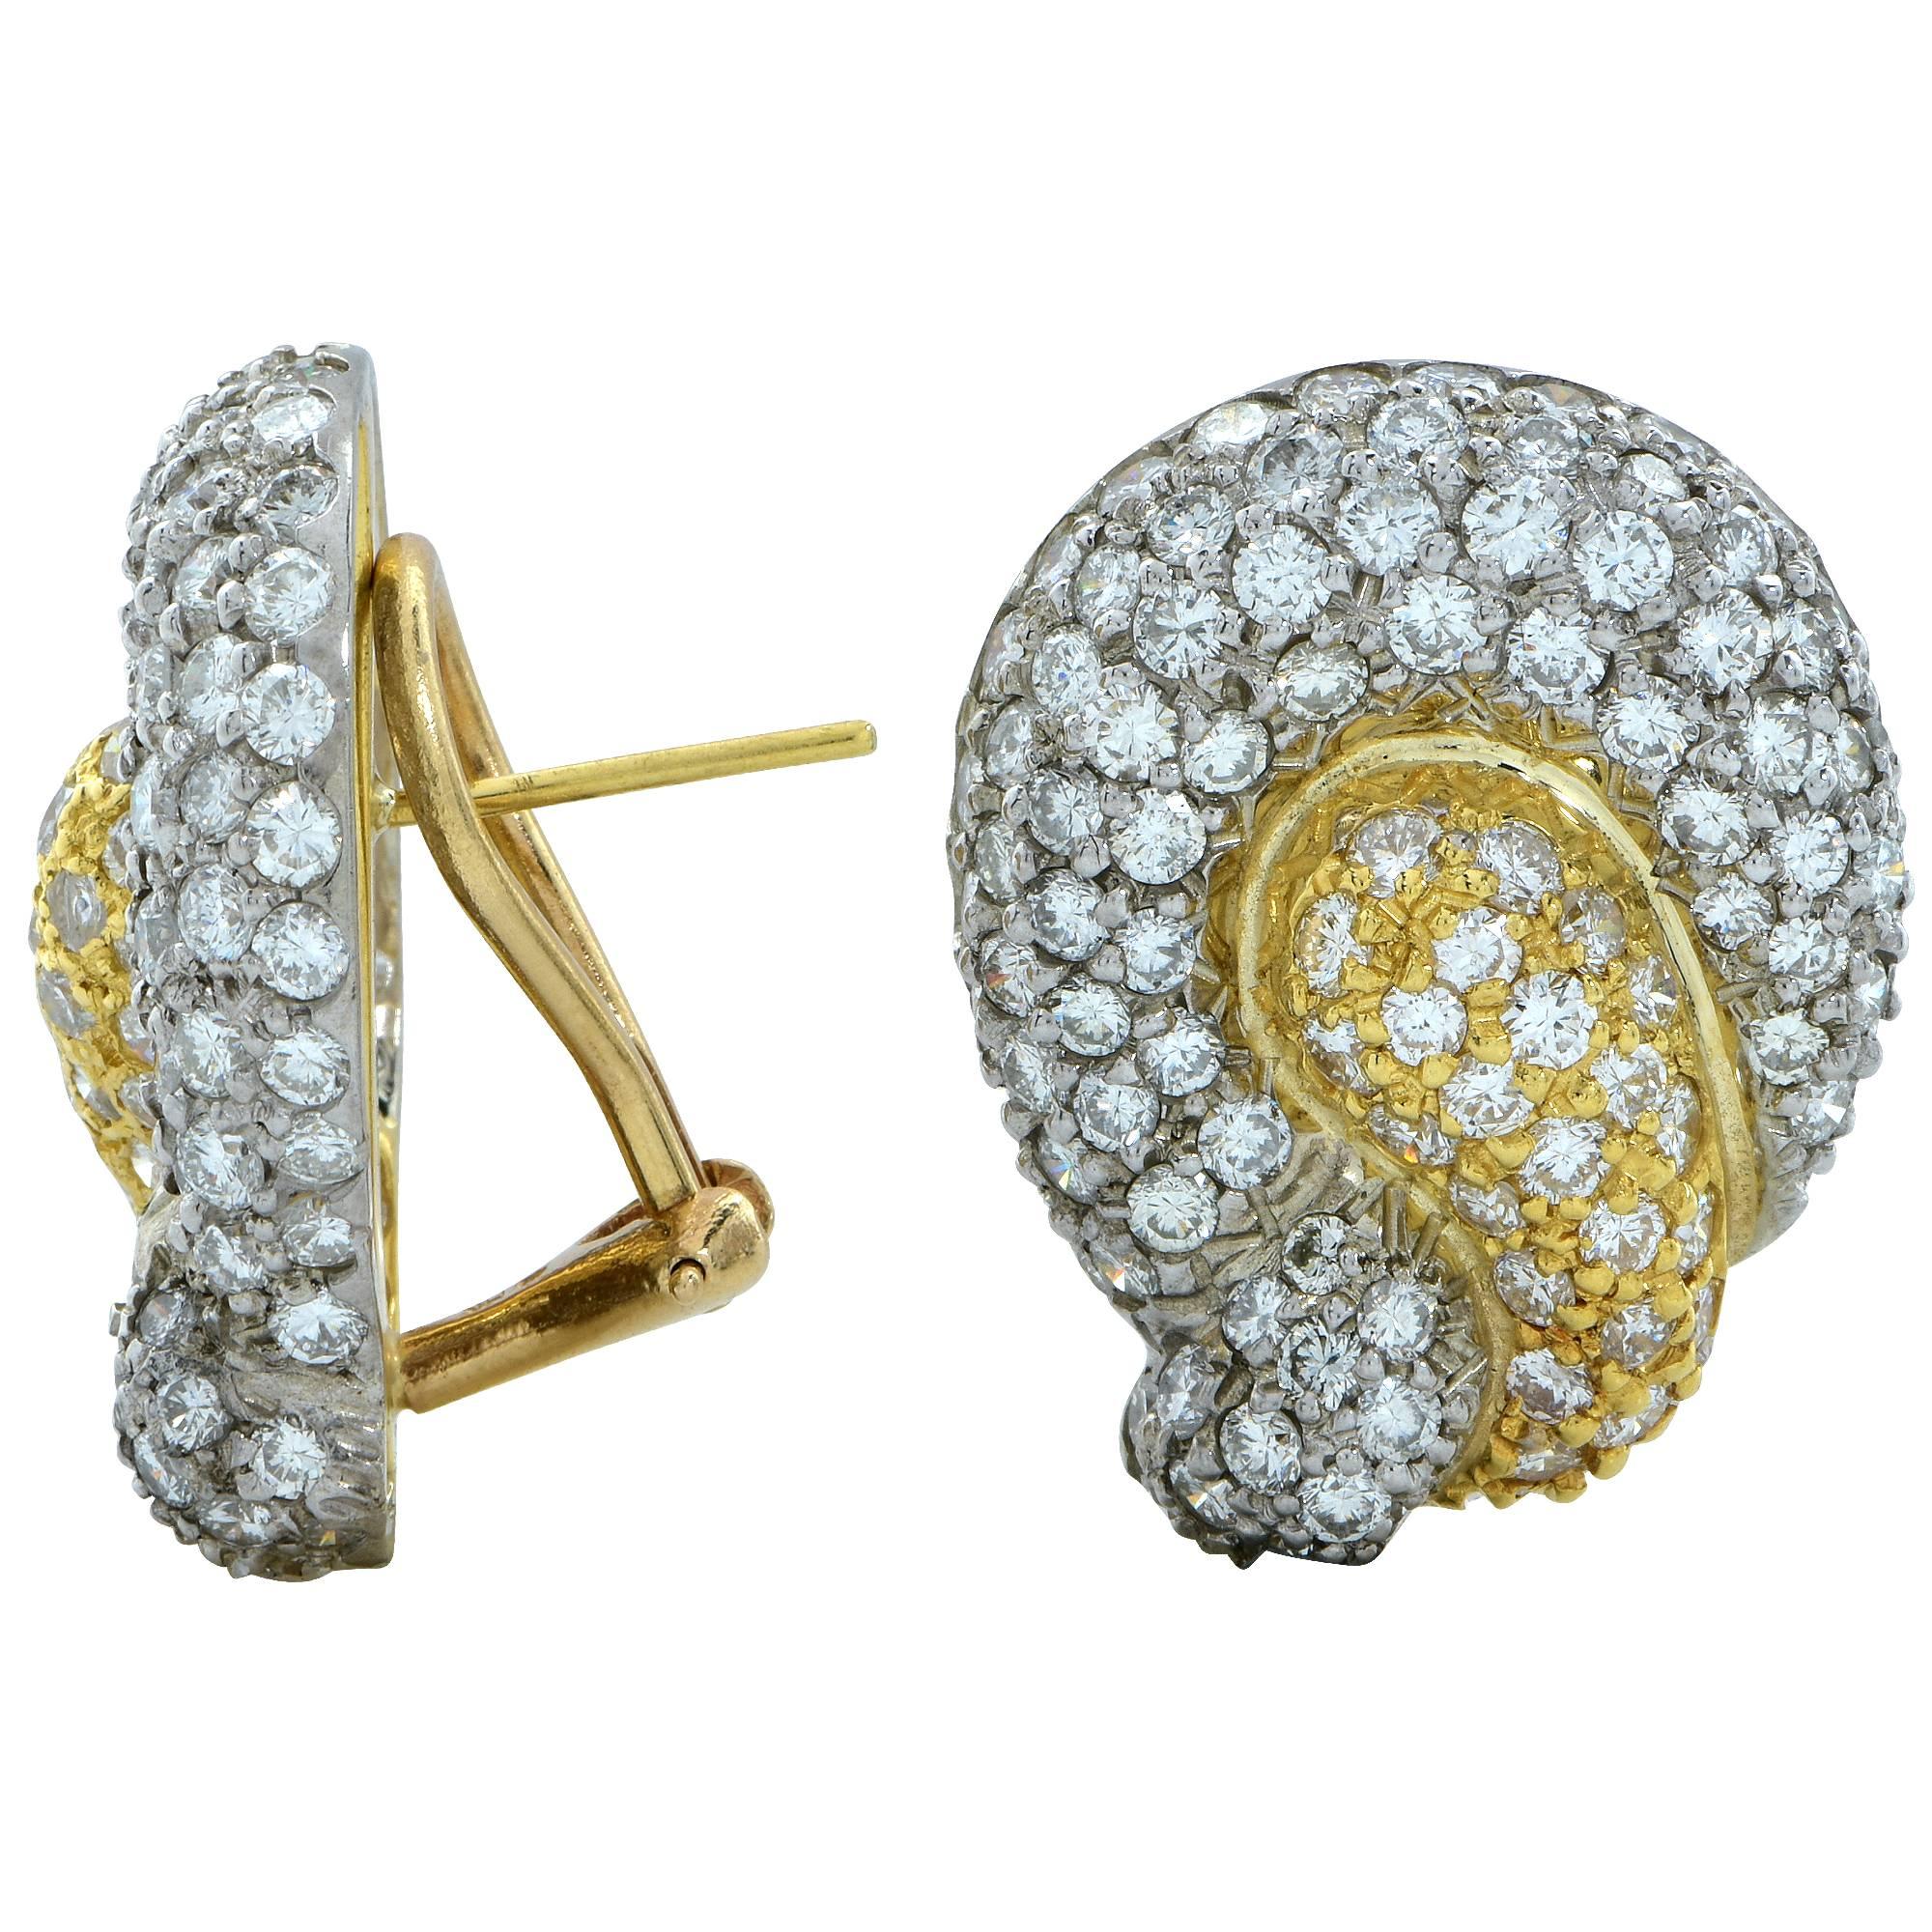 These lovely 18k two-tone yellow and white gold diamond lever-back earrings are accented by 220 round brilliant cut diamonds weighing approximately 5.50cts total.

Measurements are available upon request.
It is stamped and/or tested as 18k gold.
The